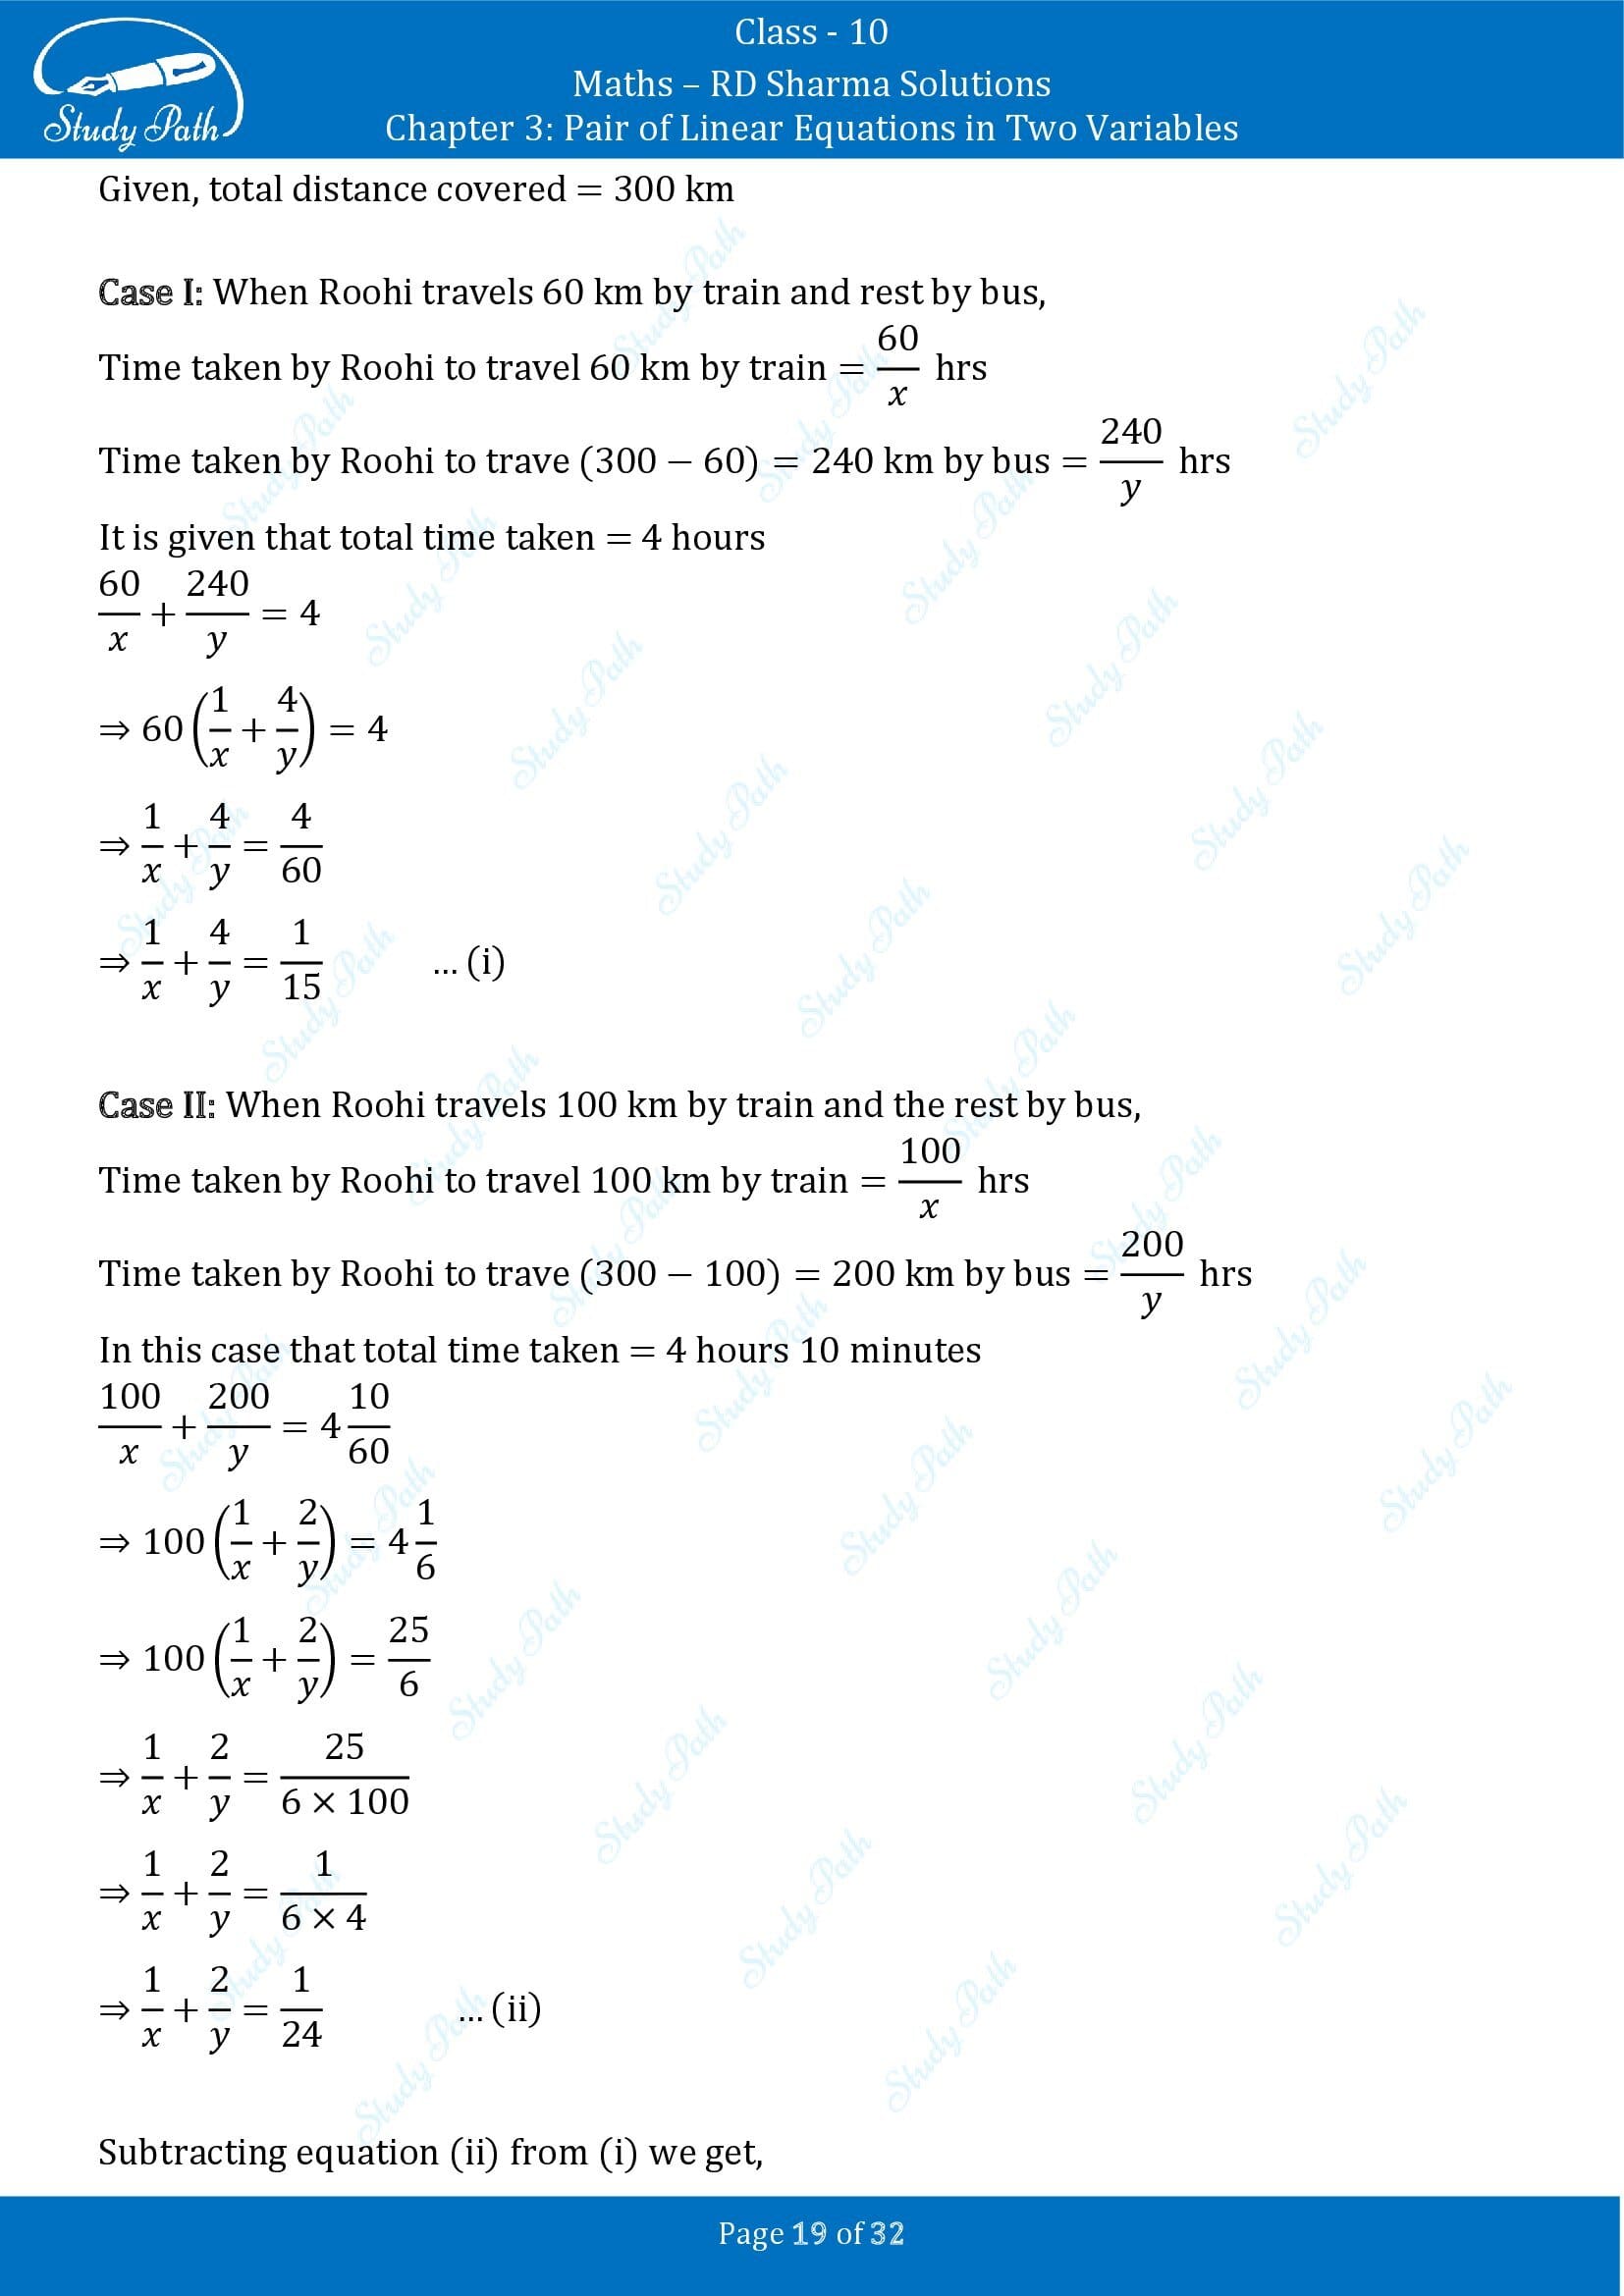 RD Sharma Solutions Class 10 Chapter 3 Pair of Linear Equations in Two Variables Exercise 3.10 00019